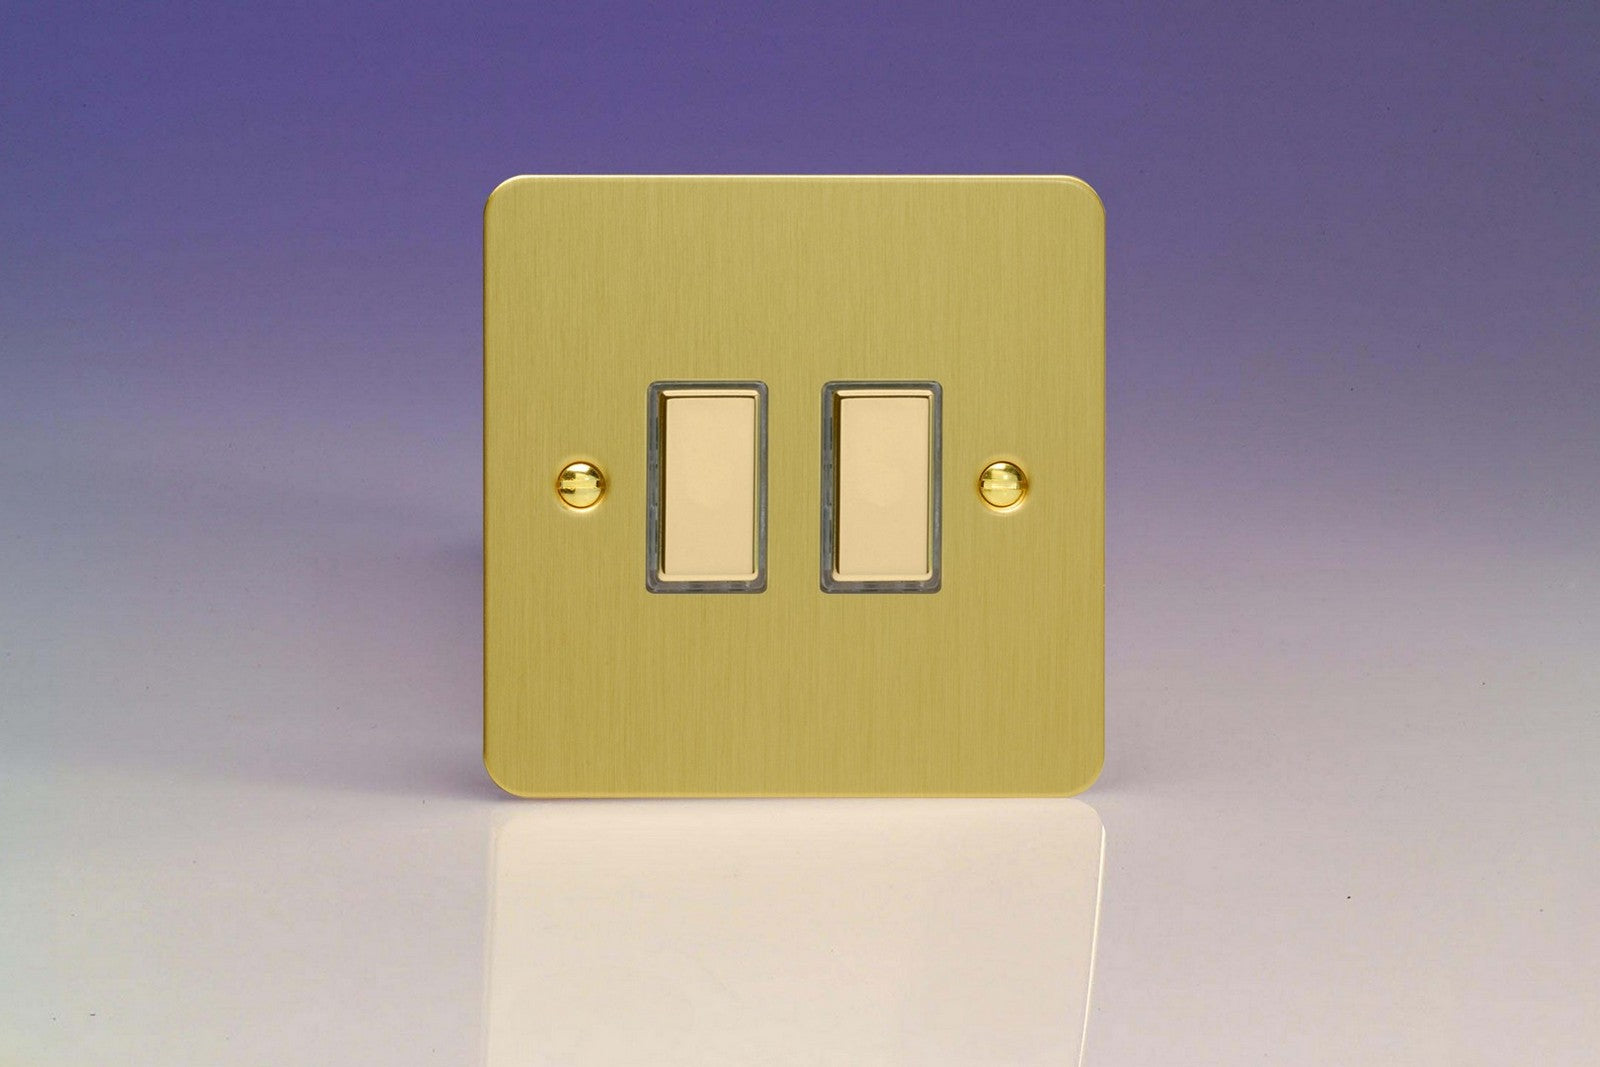 Varilight JFBES002 Ultraflat Brushed Brass 2-Gang Tactile Touch Control Dimming Slave for use with Multi-Point Touch or Remote Master on 2-Way Circuits